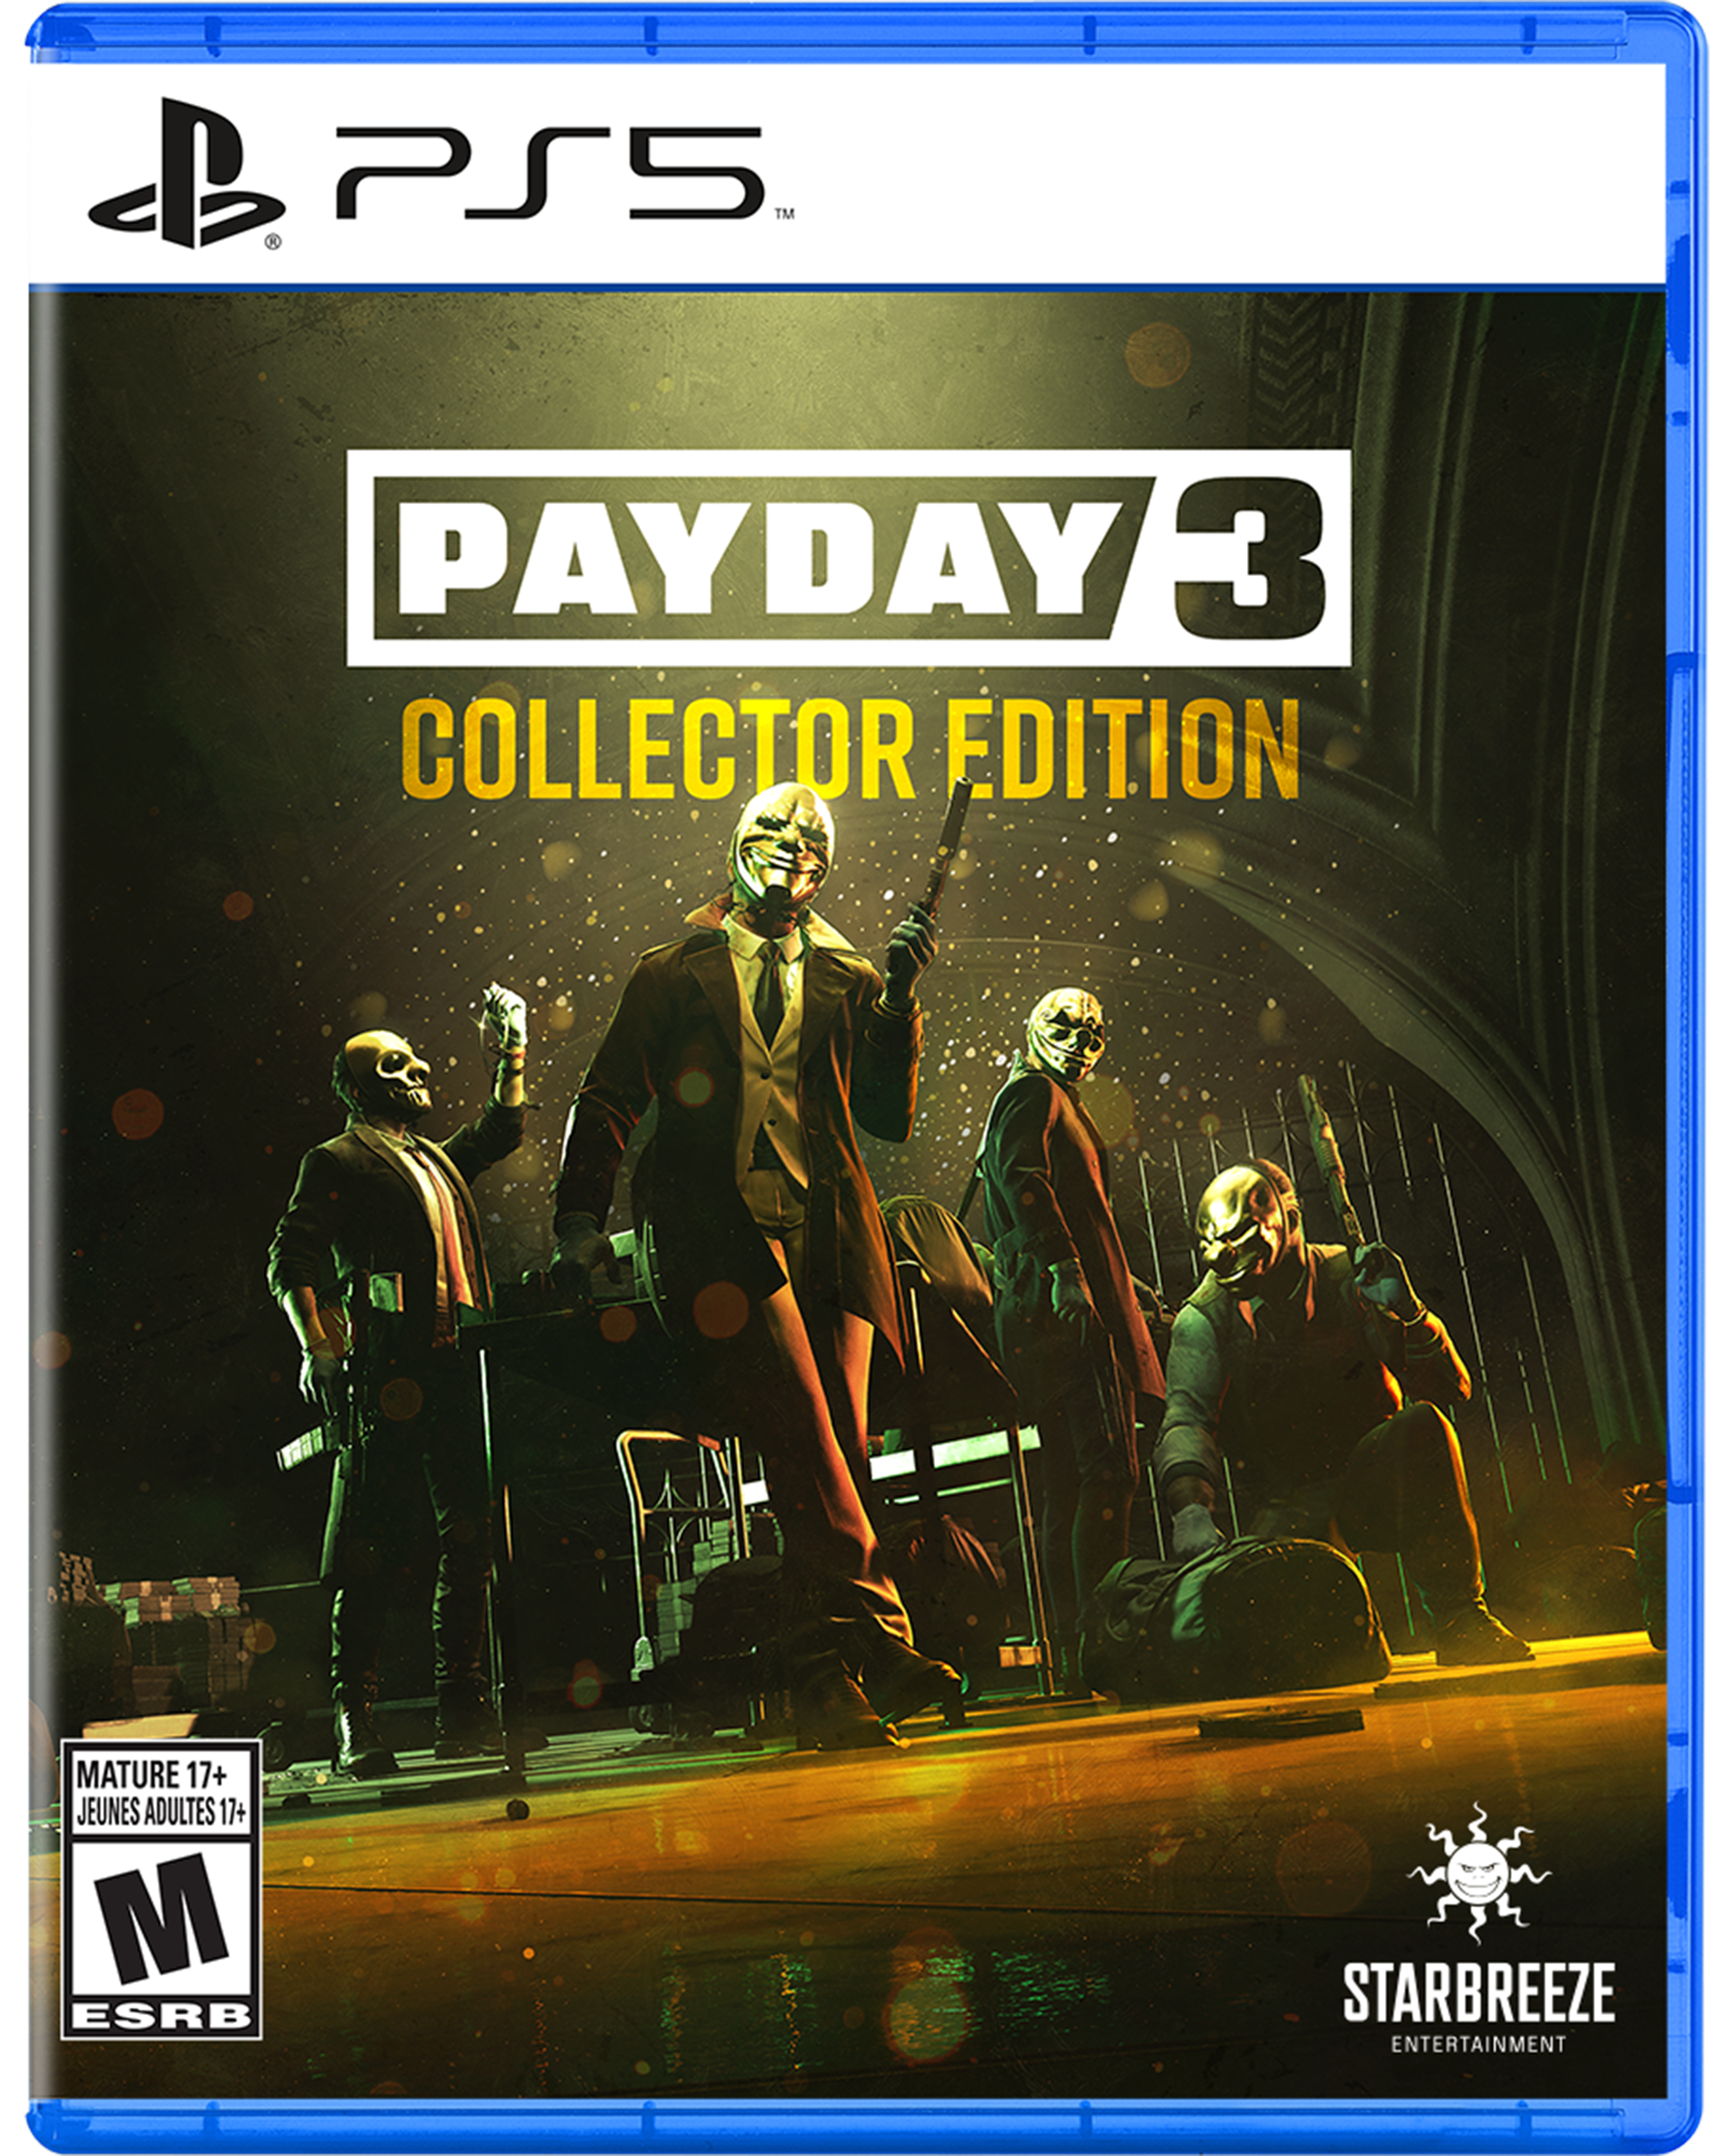 I brought gold edition for payday 3 and on my ps5 it says I only